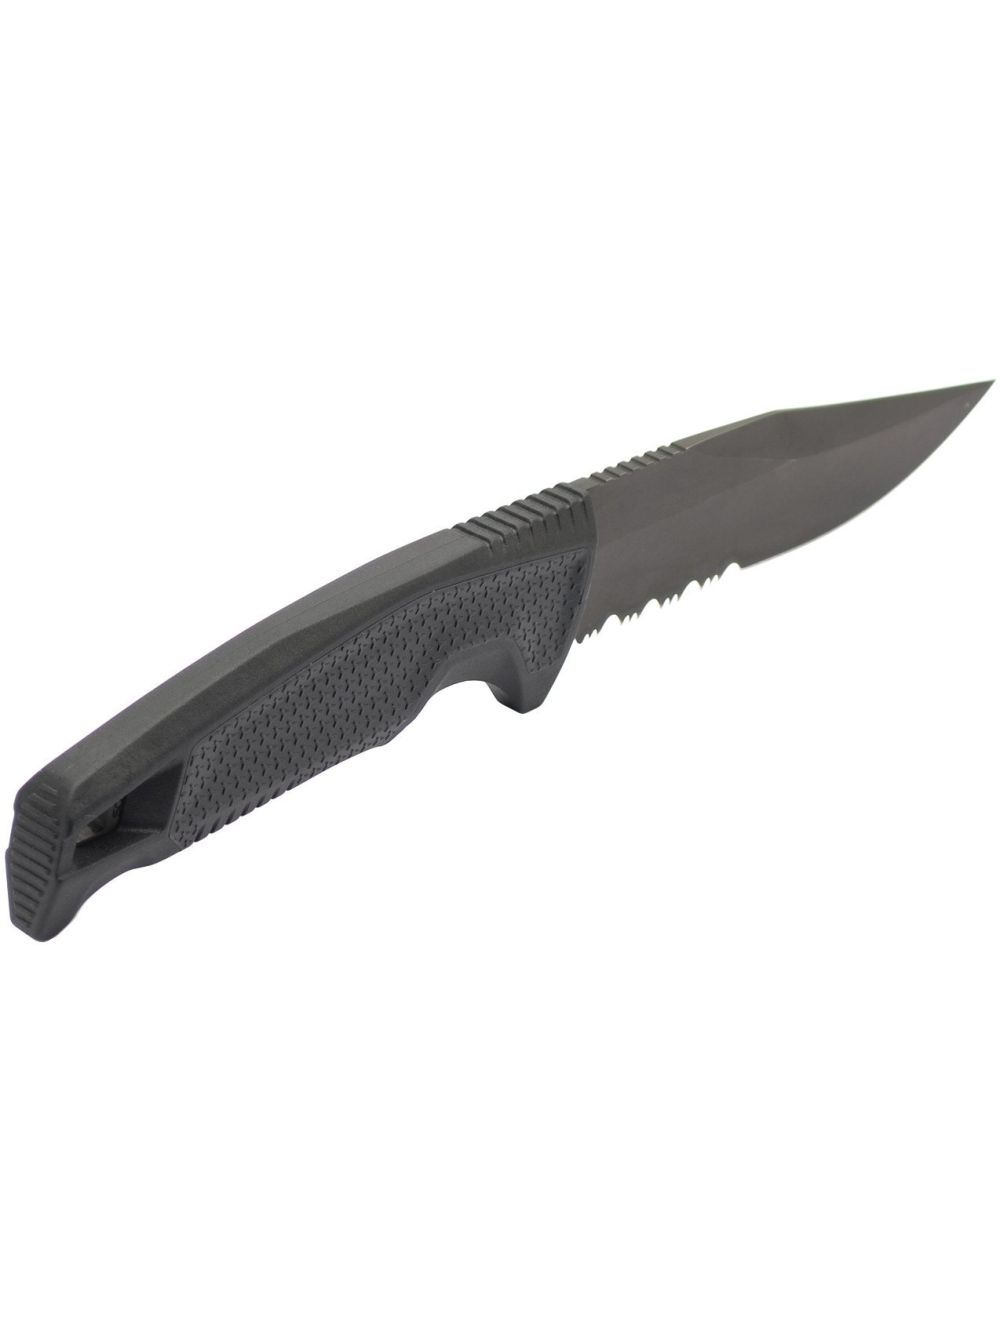 Recondo FX - Black - Partailly Serrated